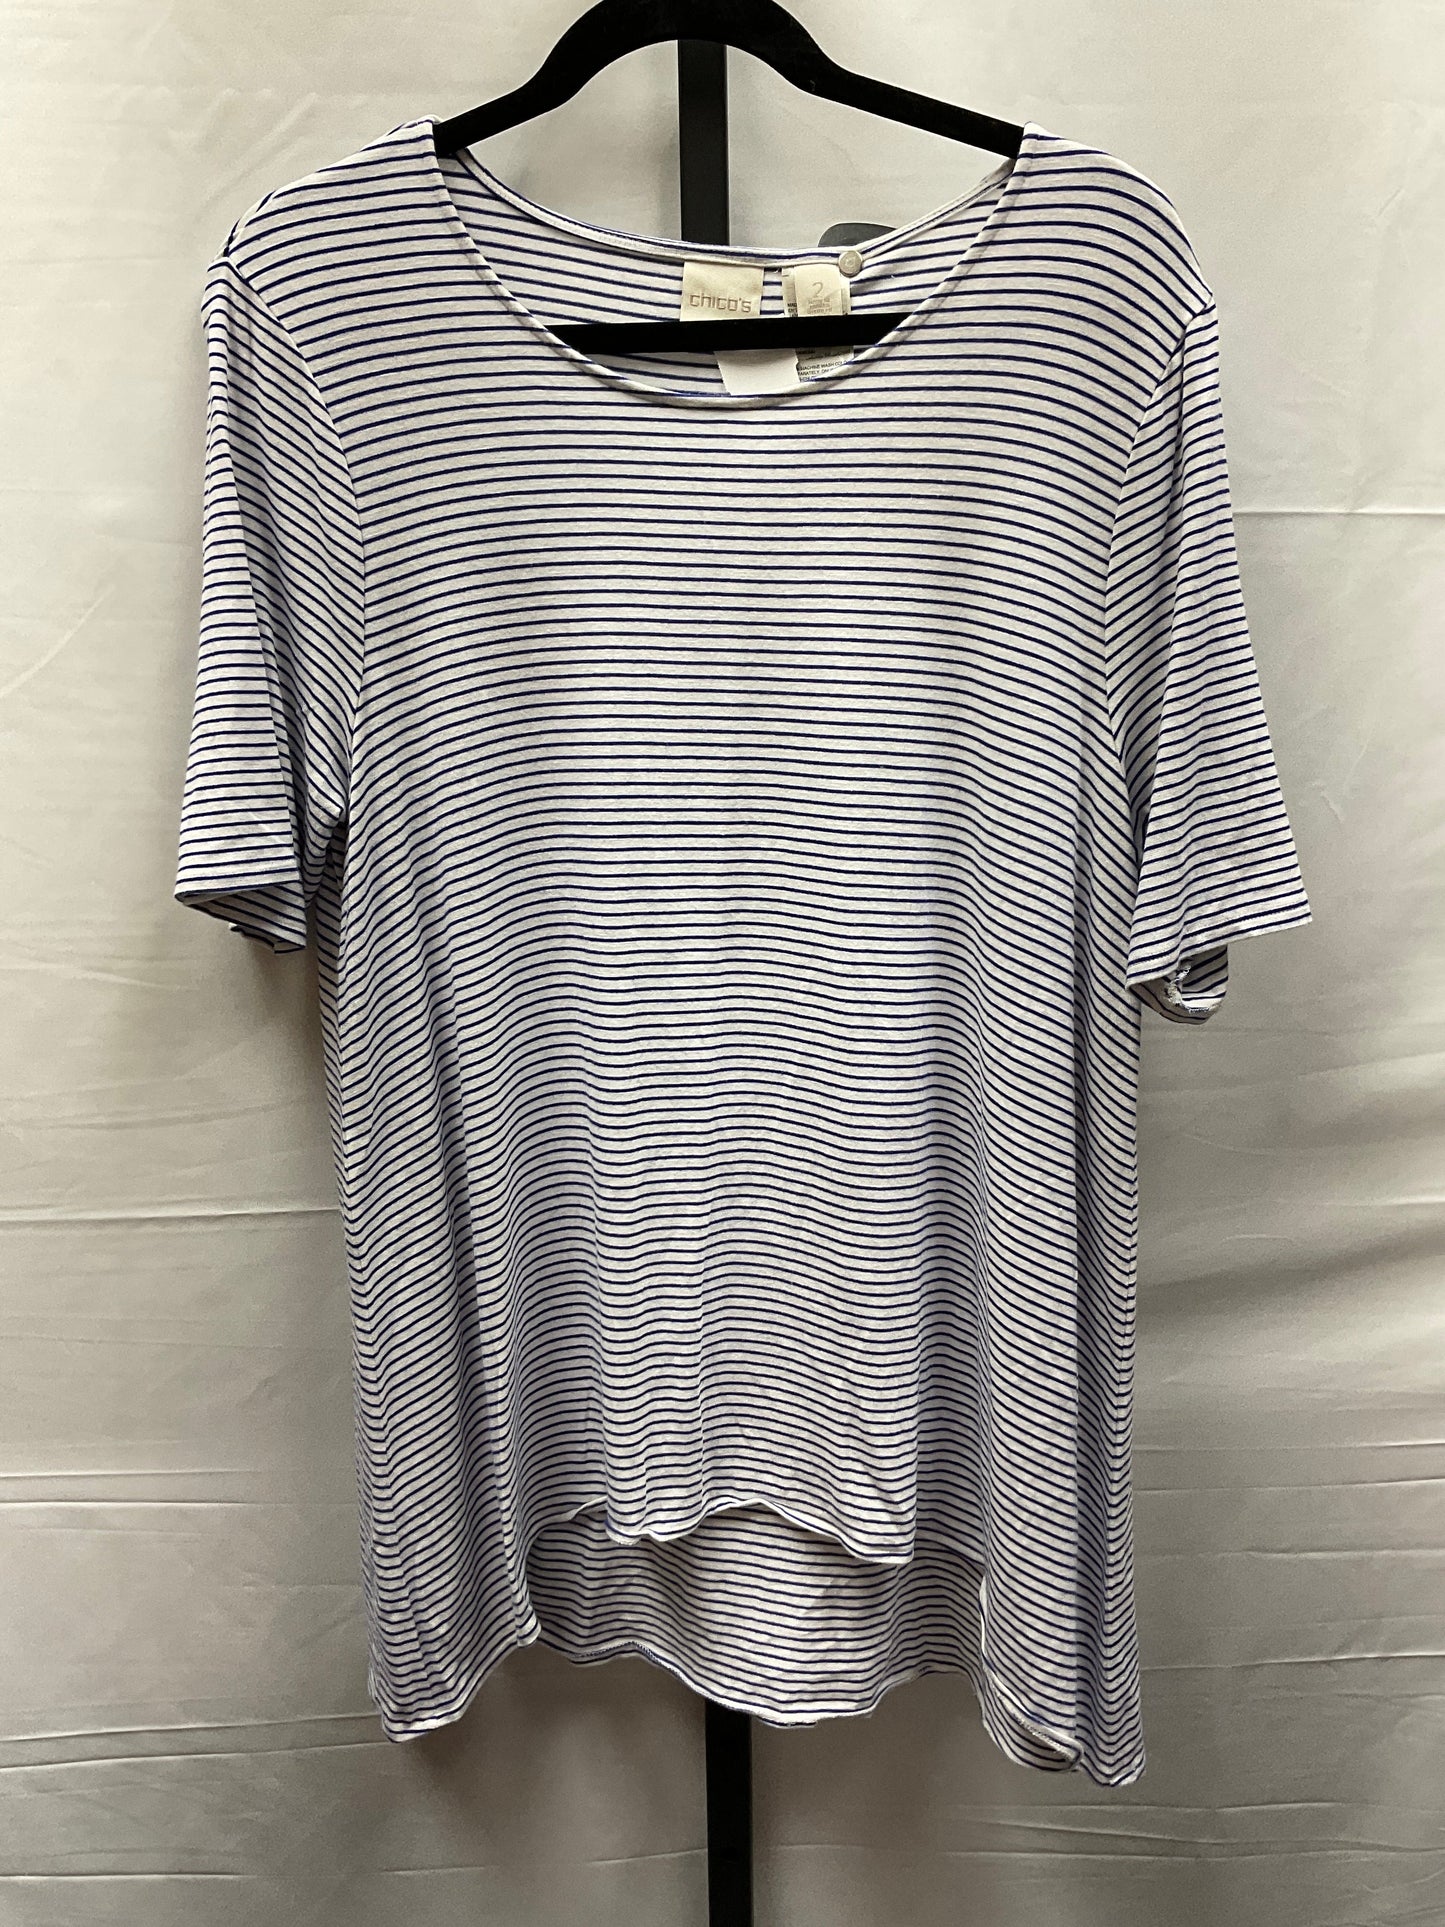 Blue & White Top Short Sleeve Chicos, Size L